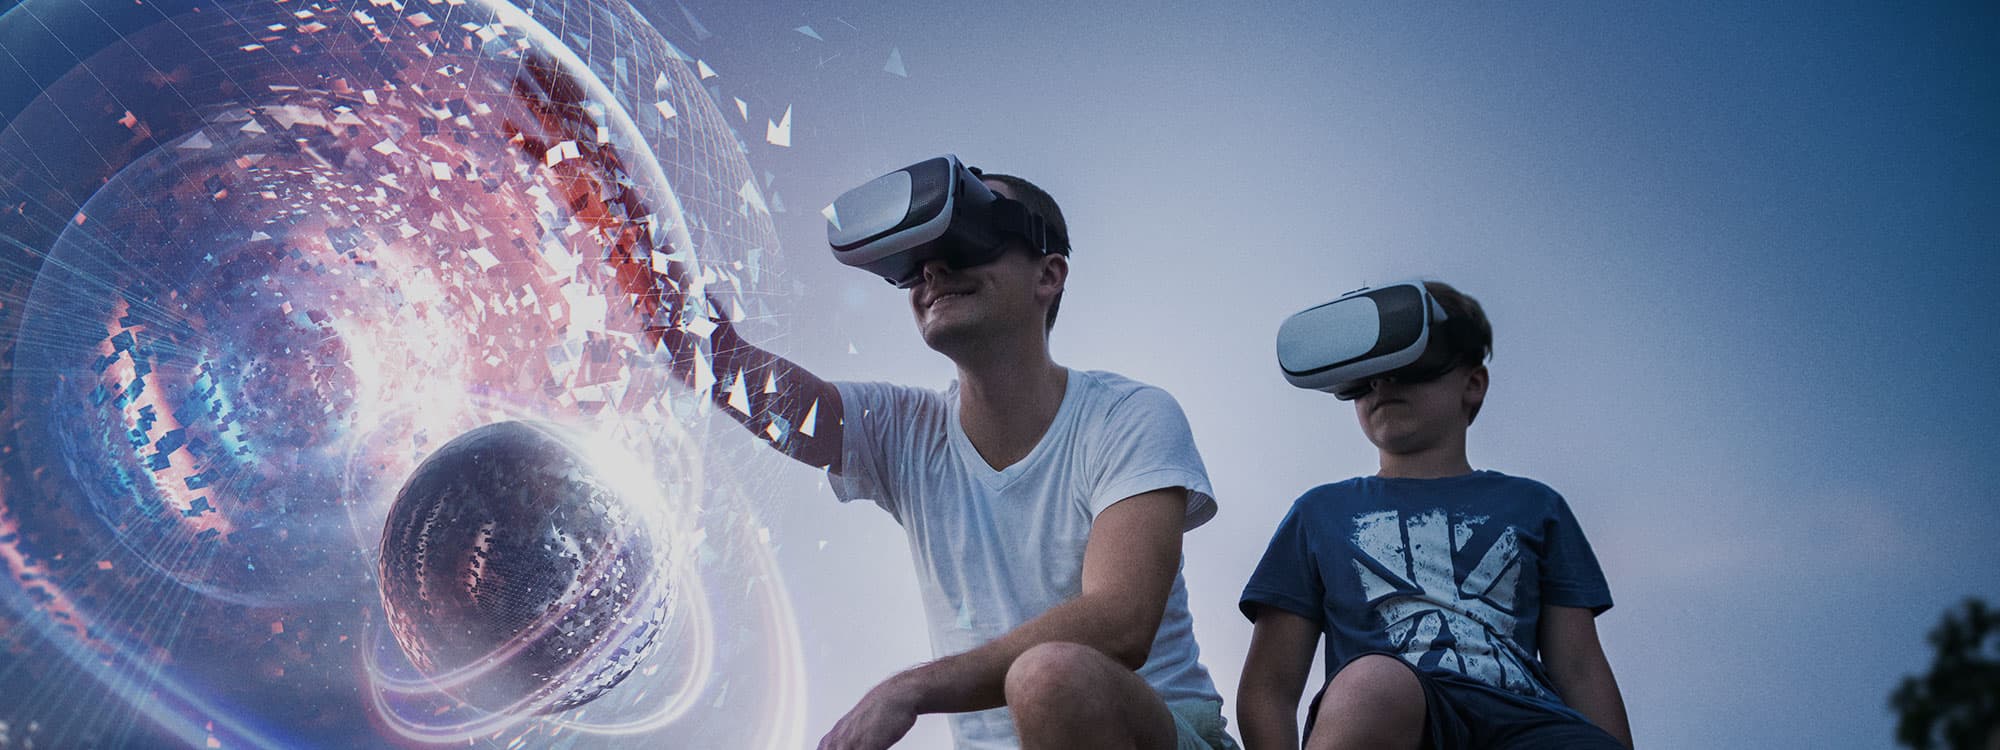 Image of two young men with virtual reality goggles on and a superimposed illustration of plants.